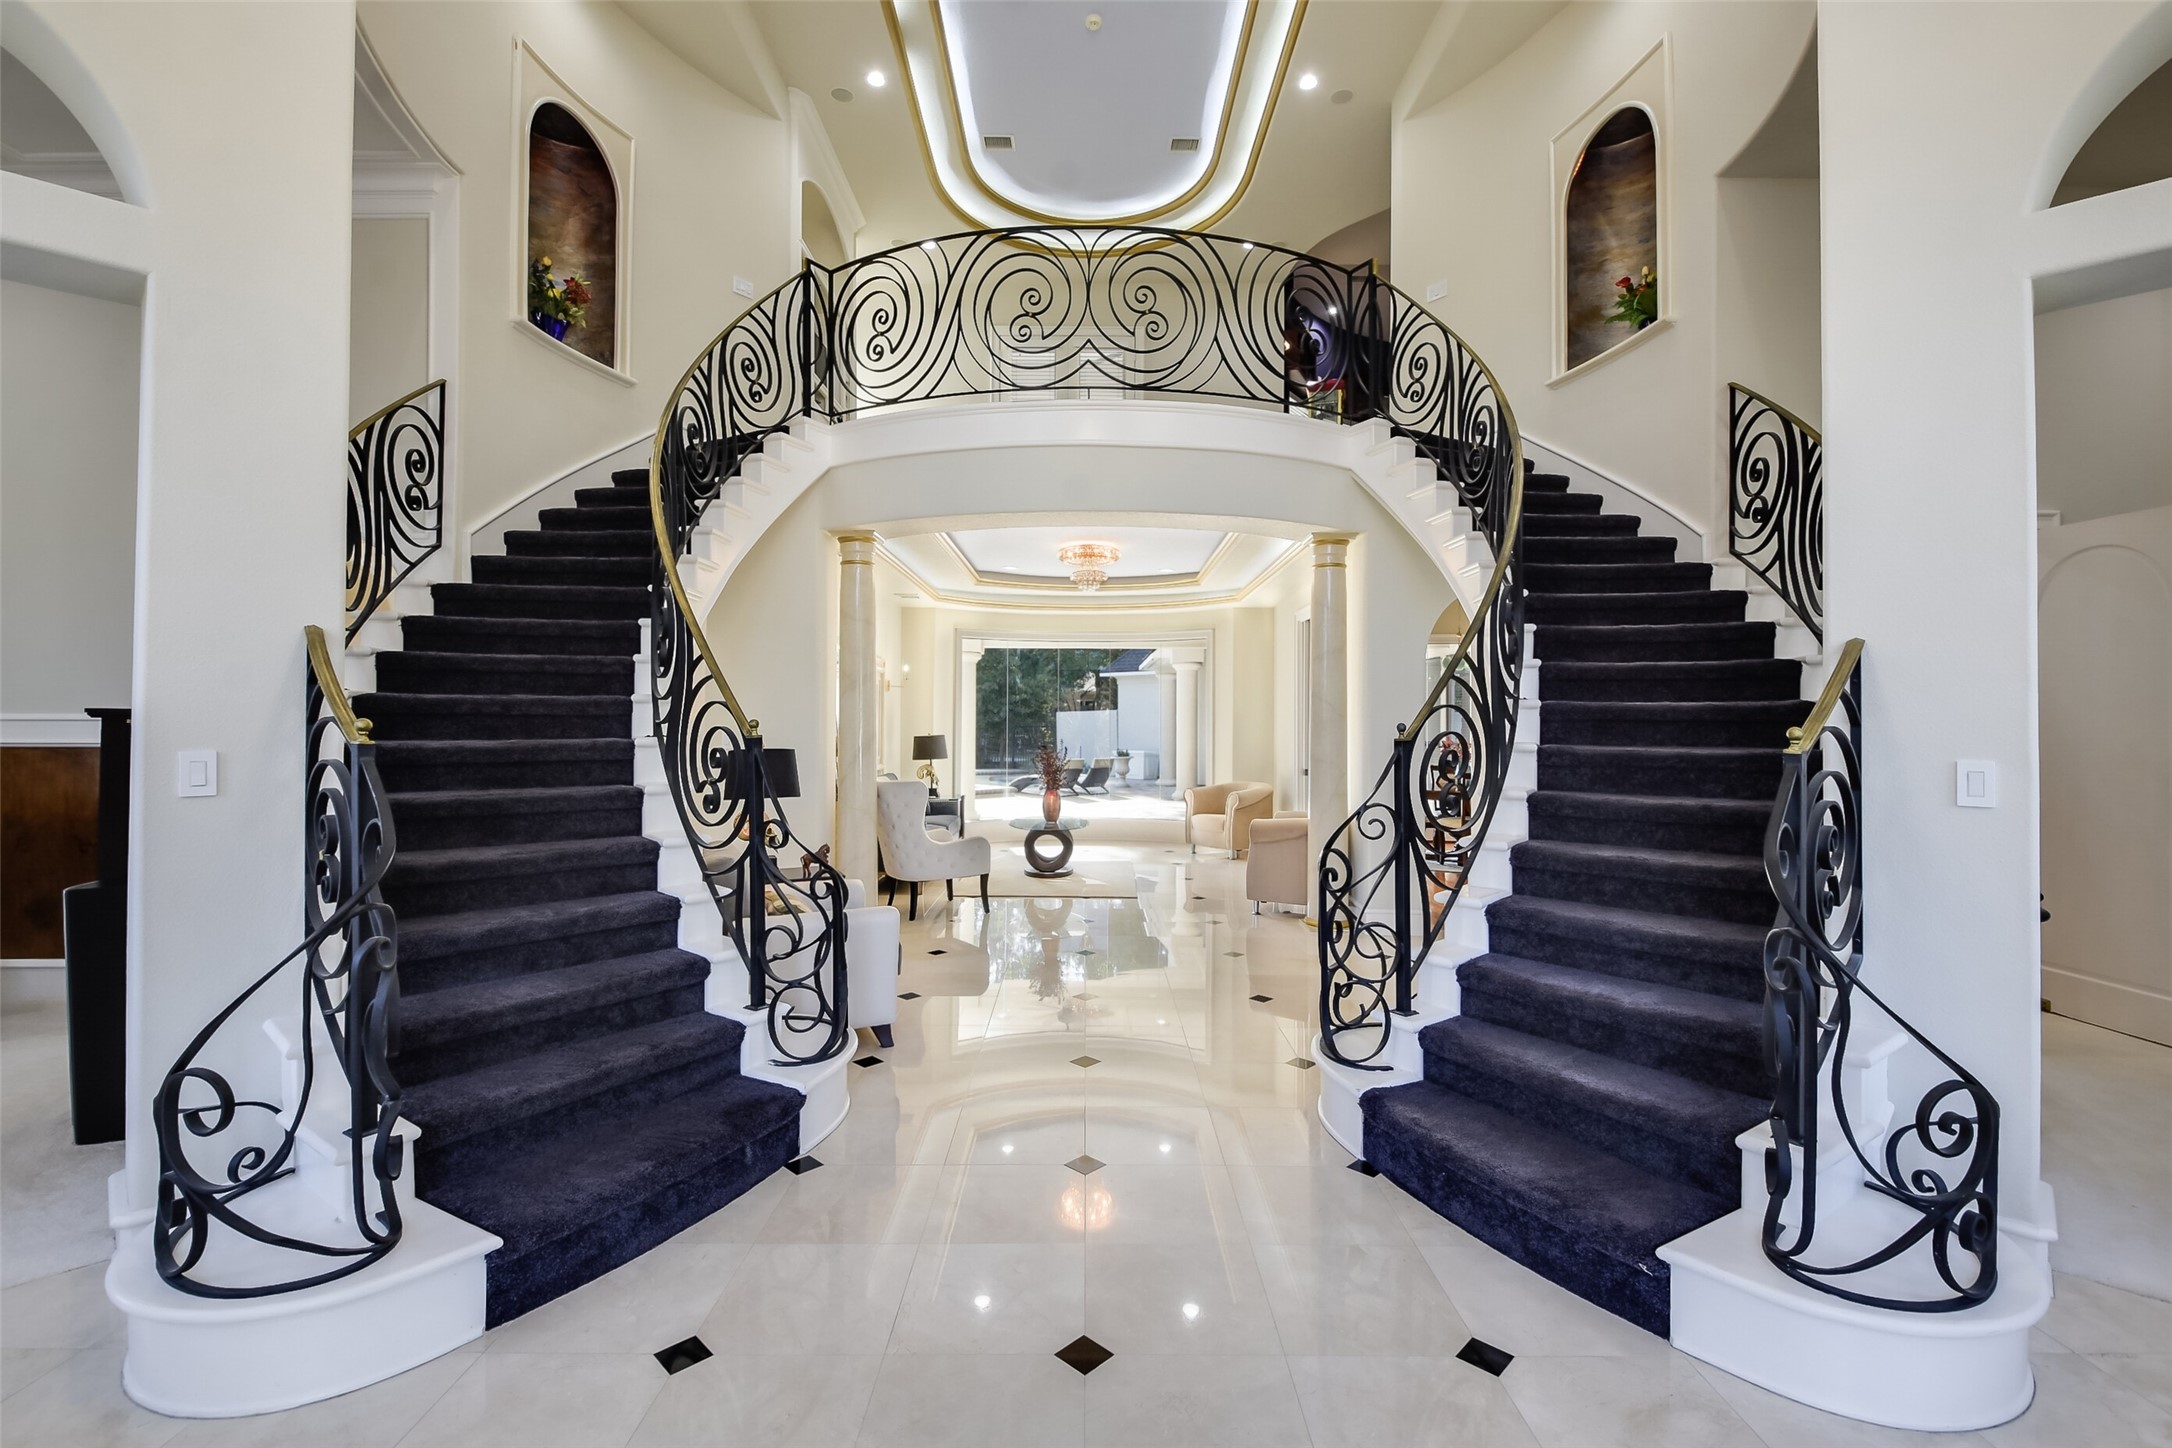 Inviting and impressive double staircase entry showcasing polished travertine floors and elegant chandelier.